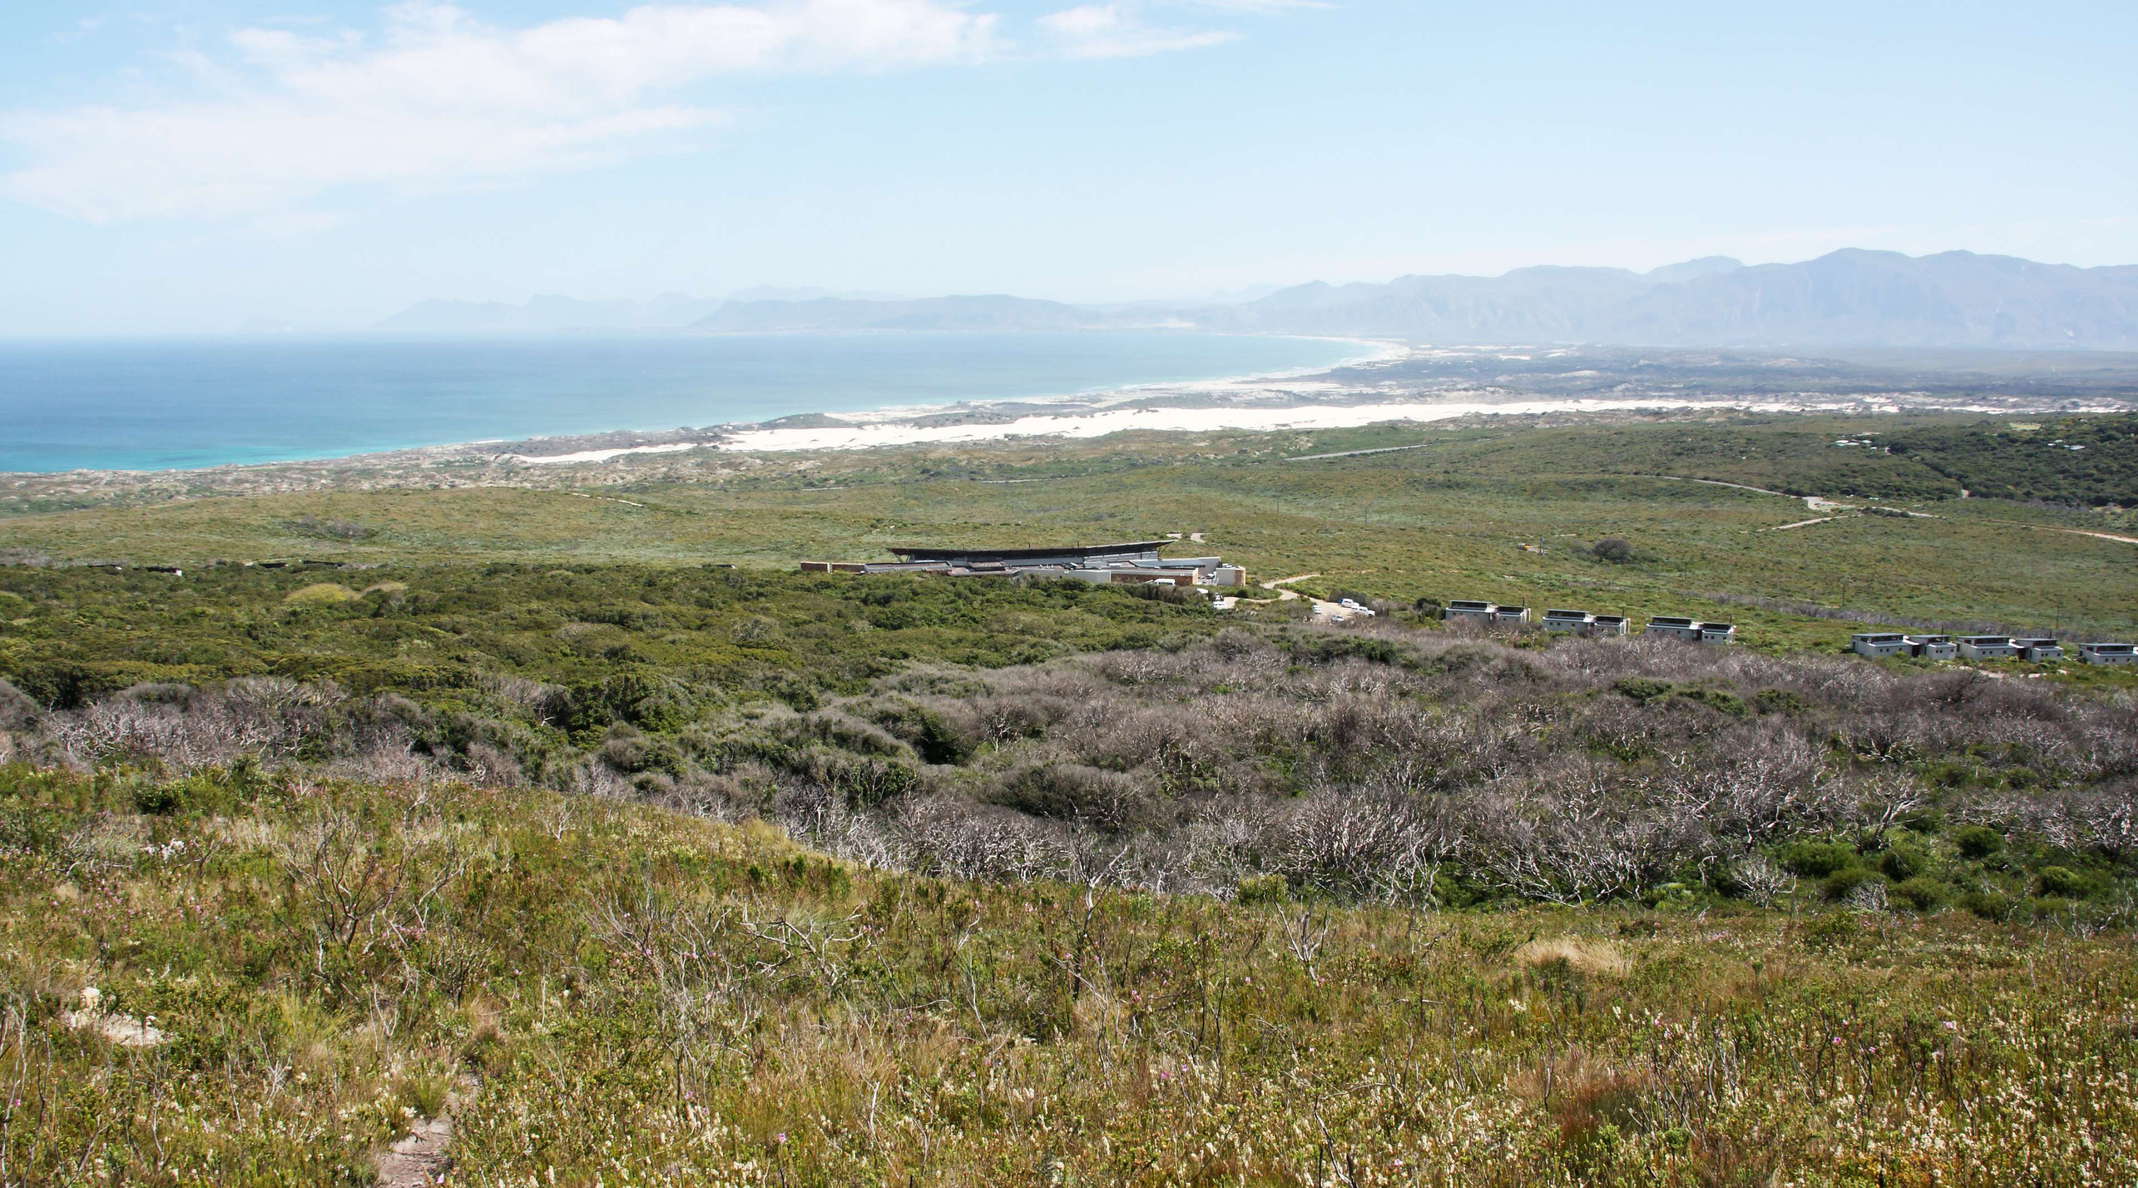 Grootbos NR with milkwood forest and Walker Bay